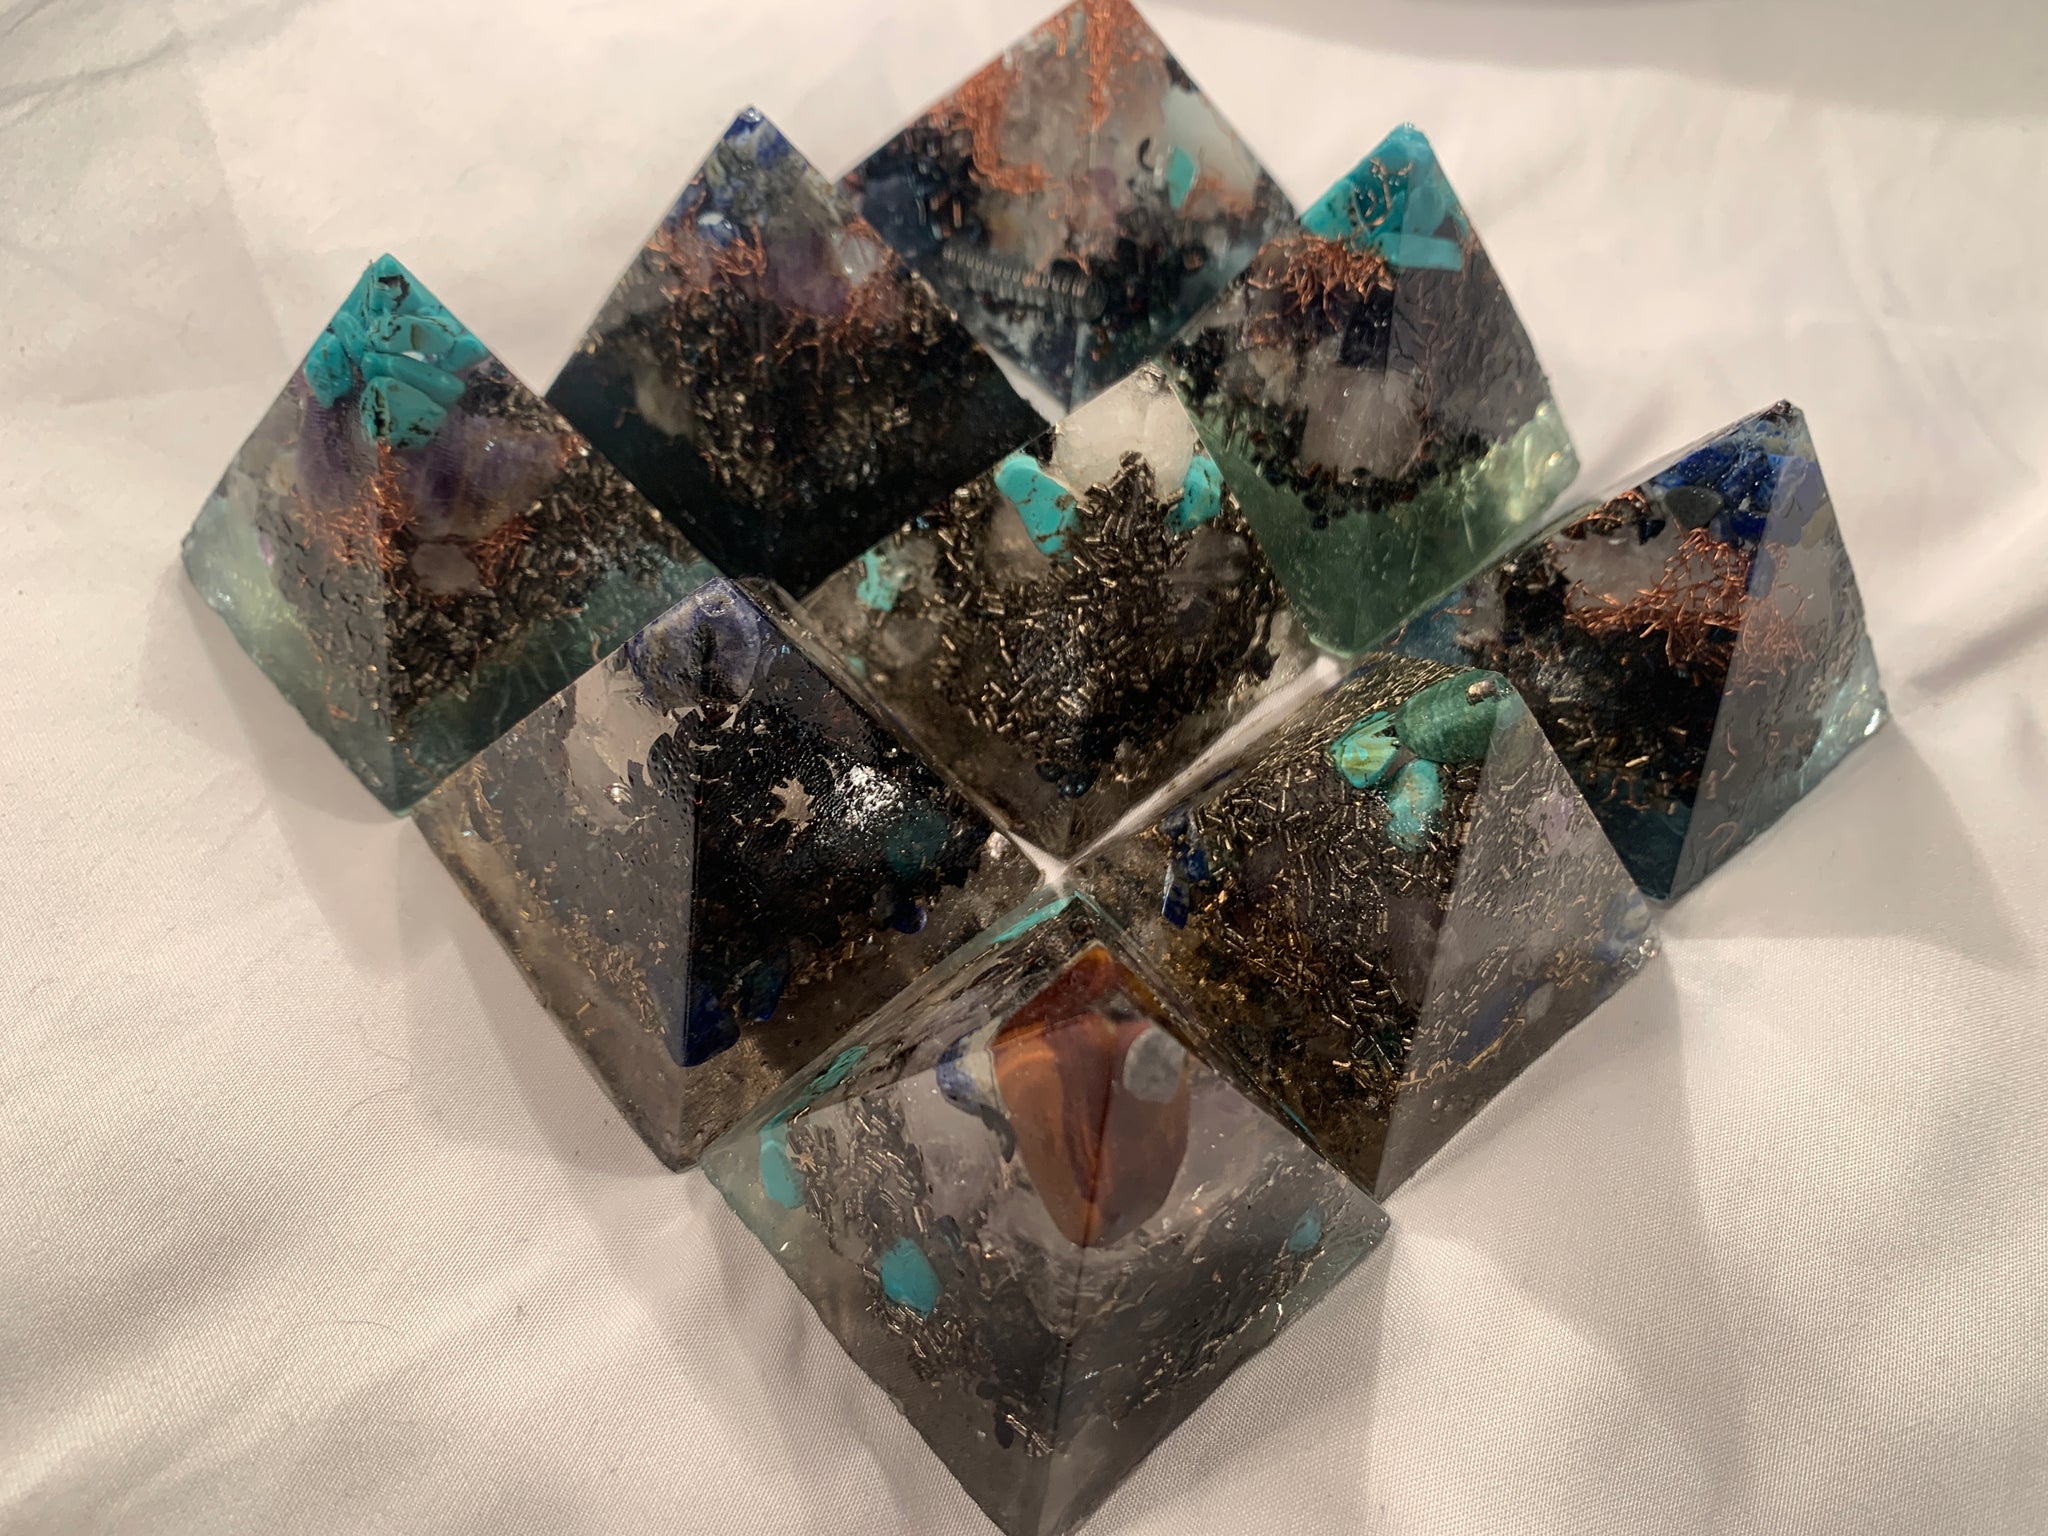 set of 9 hand made Turquoise and Copper quartz crystal Orgone Energy Pyramids for EMF protection